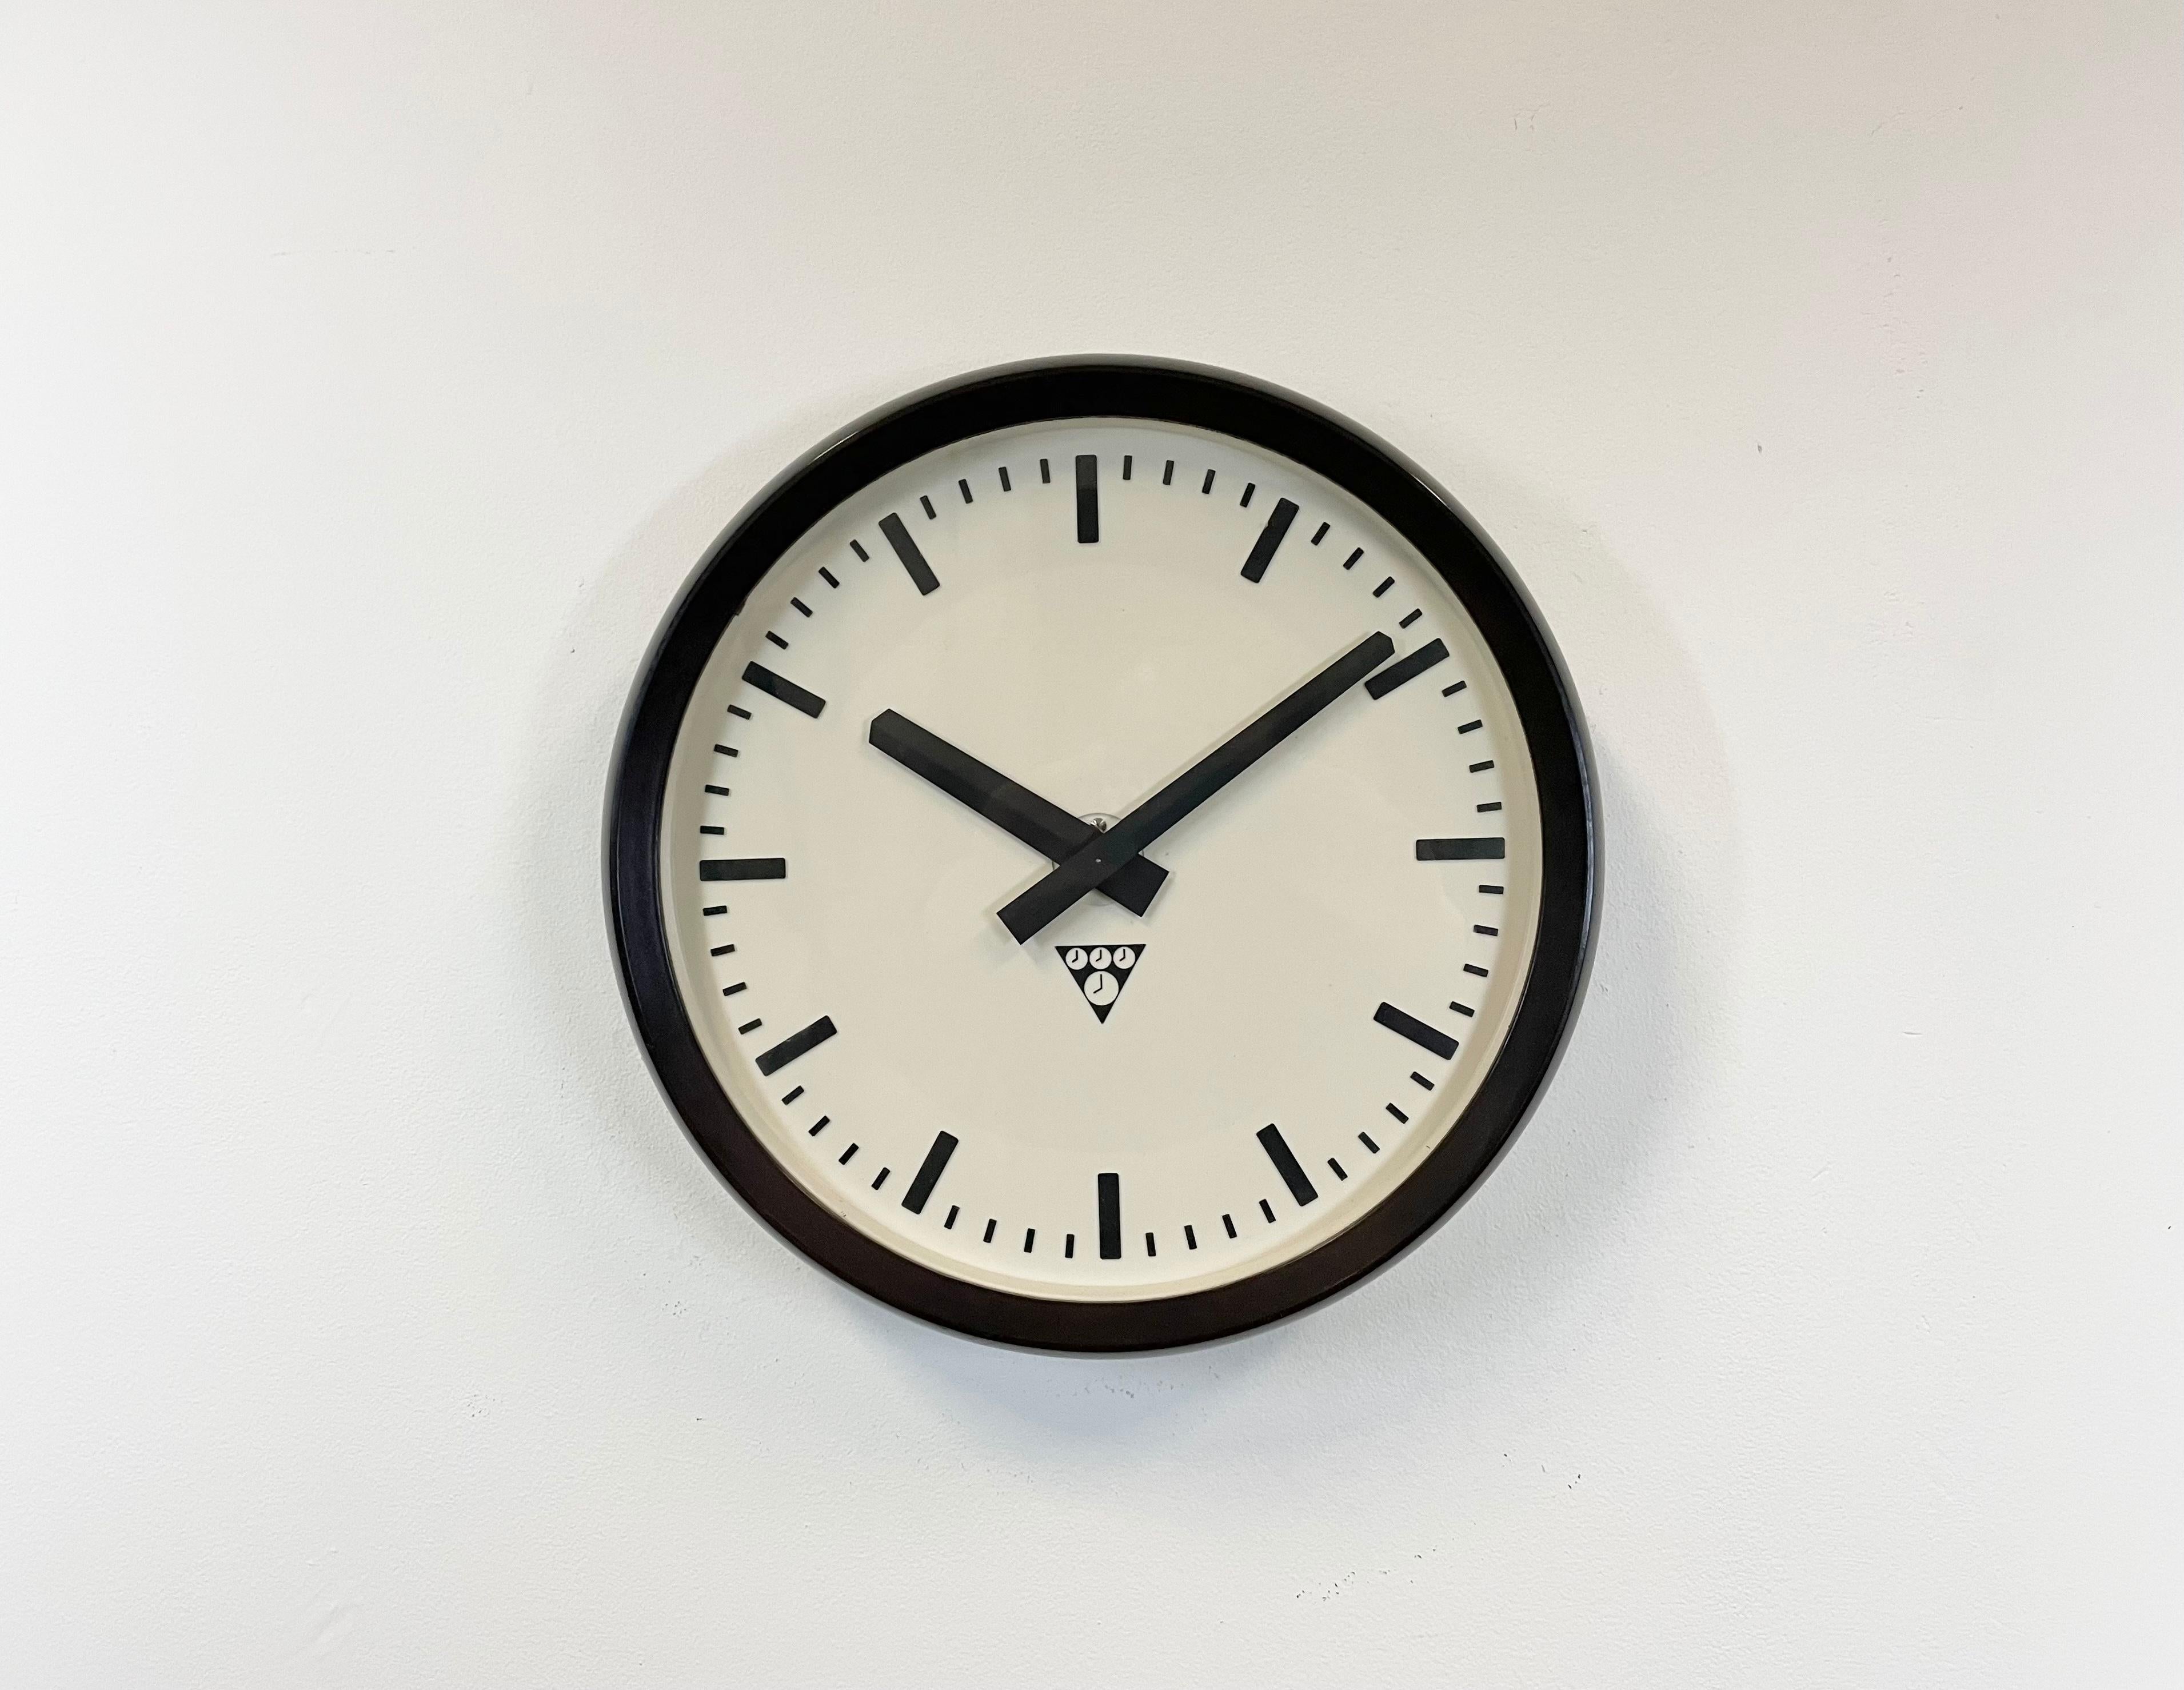 This wall clock was produced by Pragotron in former Czechoslovakia during the 1960s. The piece features a brown bakelite frame, a white bakelite dial, an aluminum hands and a clear glass cover. The piece has been converted into a battery-powered